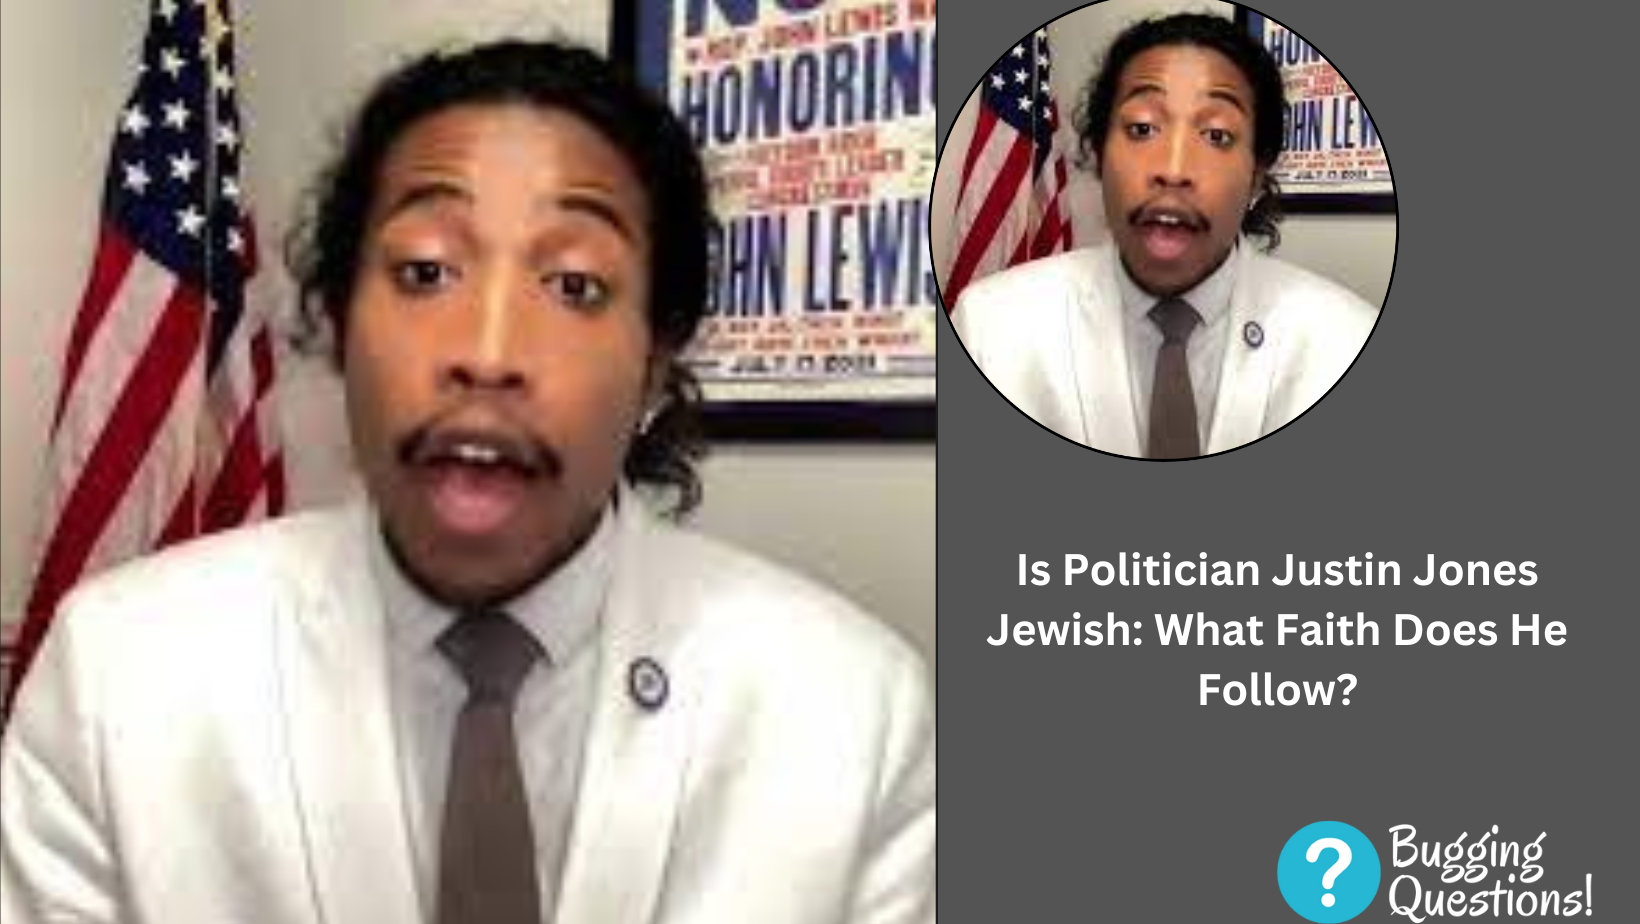 Is Politician Justin Jones Jewish: What Faith Does He Follow?